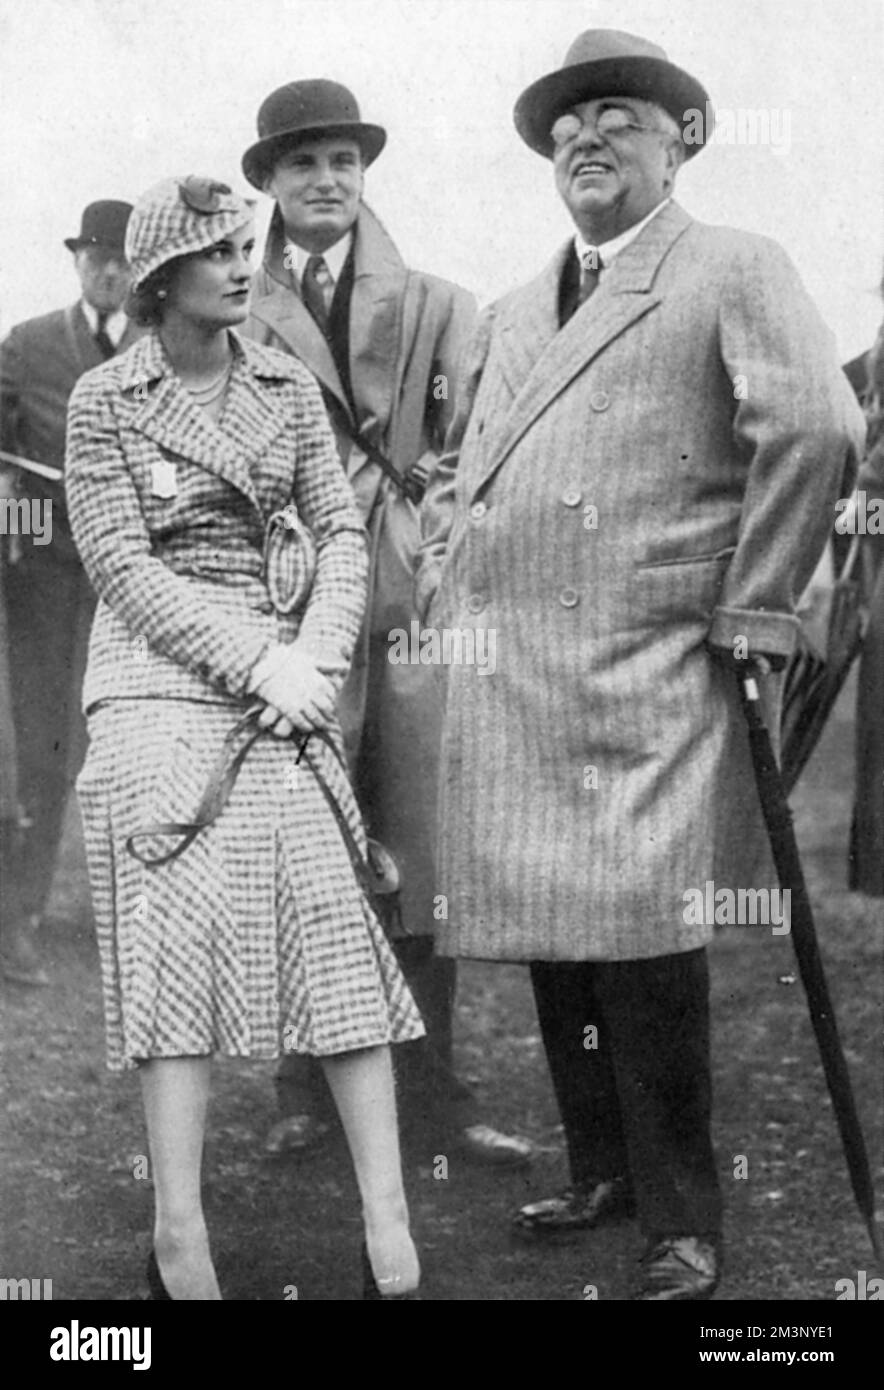 Miss Margaret Whigham (1912-1993), later Mrs Charles Sweeny and then Margaret Campbell, Duchess of Argyll, pictured in 1931 at the autumn race meeting at Newbury with H.H. The Prince Aga Khan, who had seven horses running at the meeting.  The Aga Khan's son, Prince Aly Khan, had fallen in love with Margaret in the previous year, but the romance was discouraged by her parents.         Date: 1931 Stock Photo